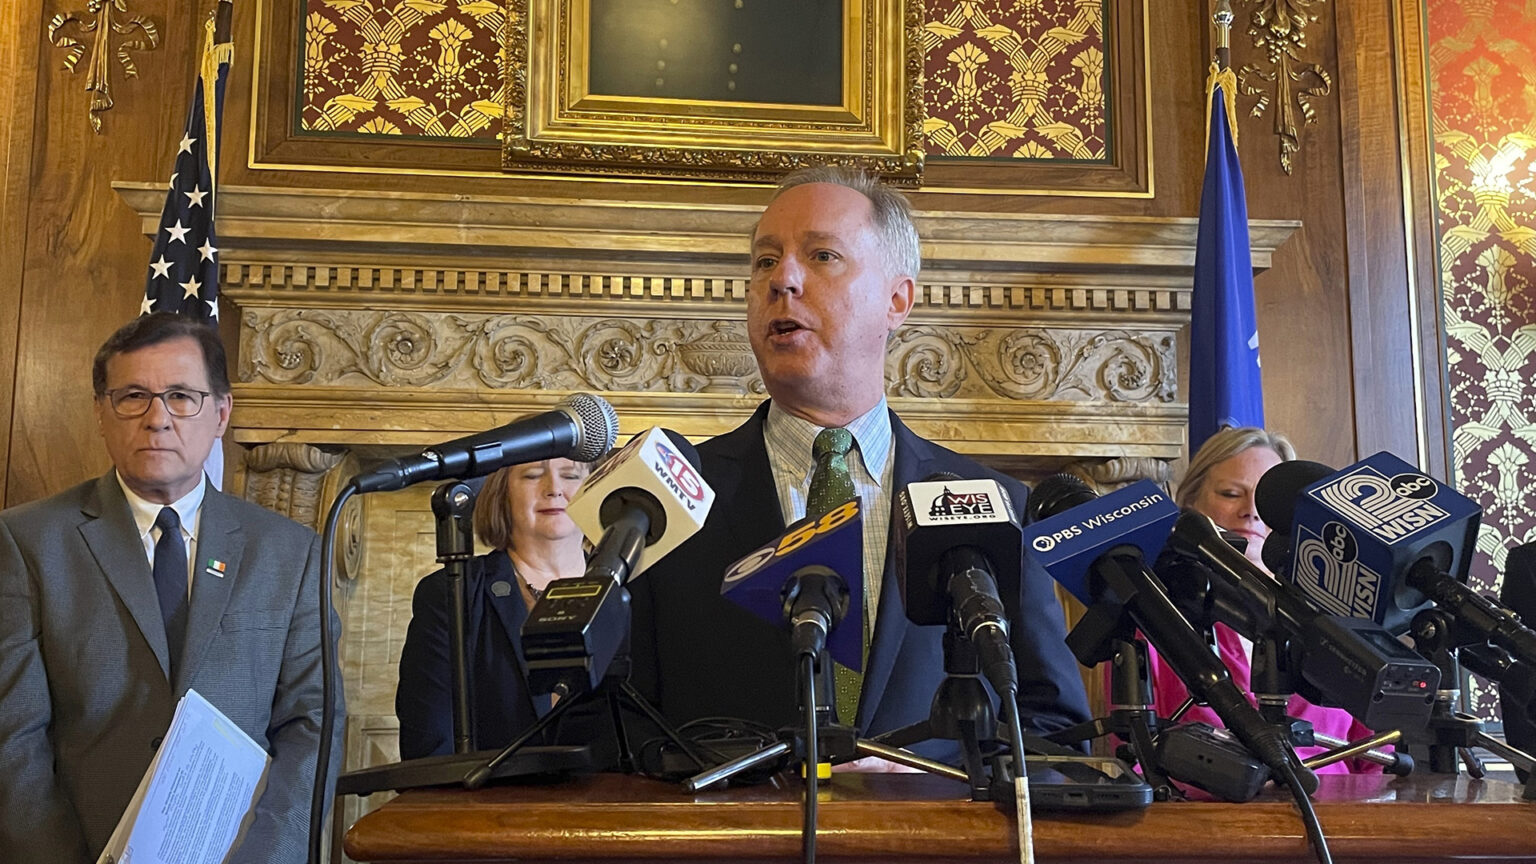 Robin Vos stands and speaks into multiple microphones with the flags of media organizations mounted to the top of a wood podium, with other people standing behind him, in a room with wood-paneled walls and toile wallpaper, a painting, and the U.S. and Wisconsin flags.